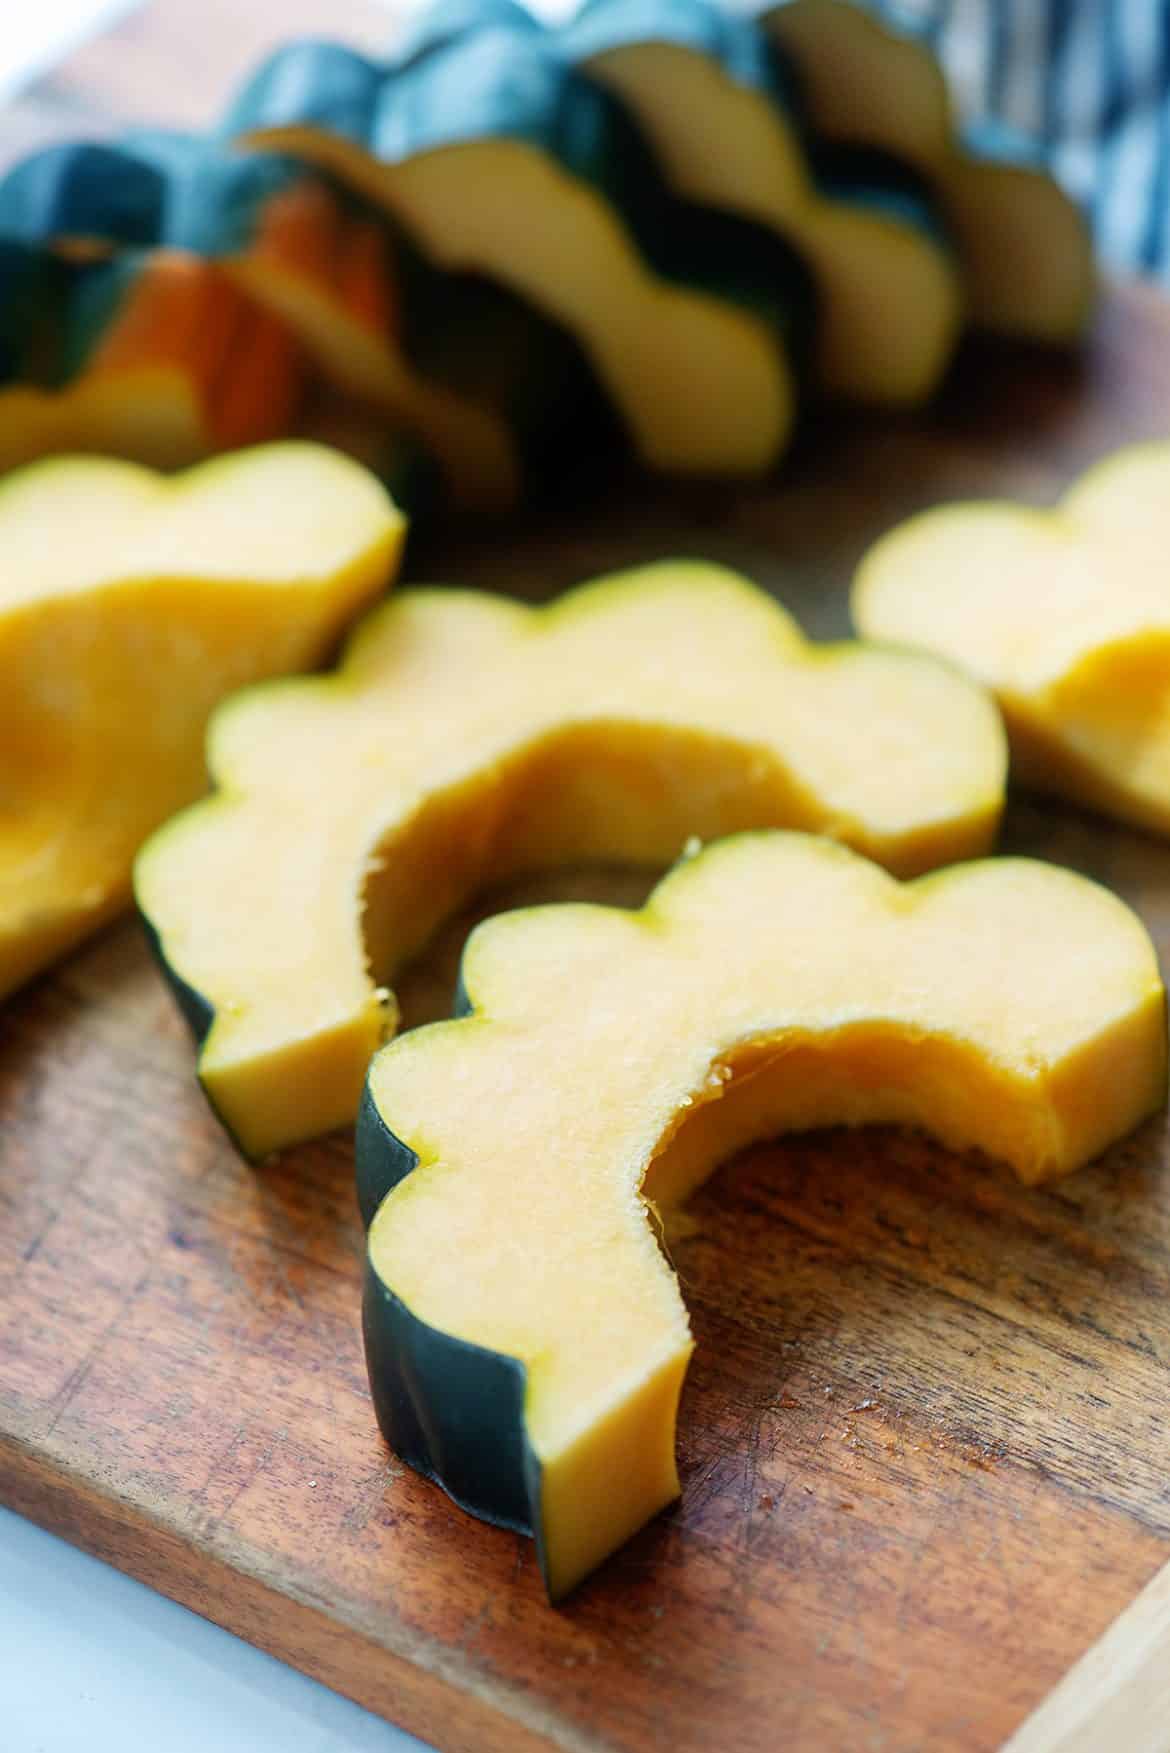 Maple Roasted Acorn Squash - That Low Carb Life